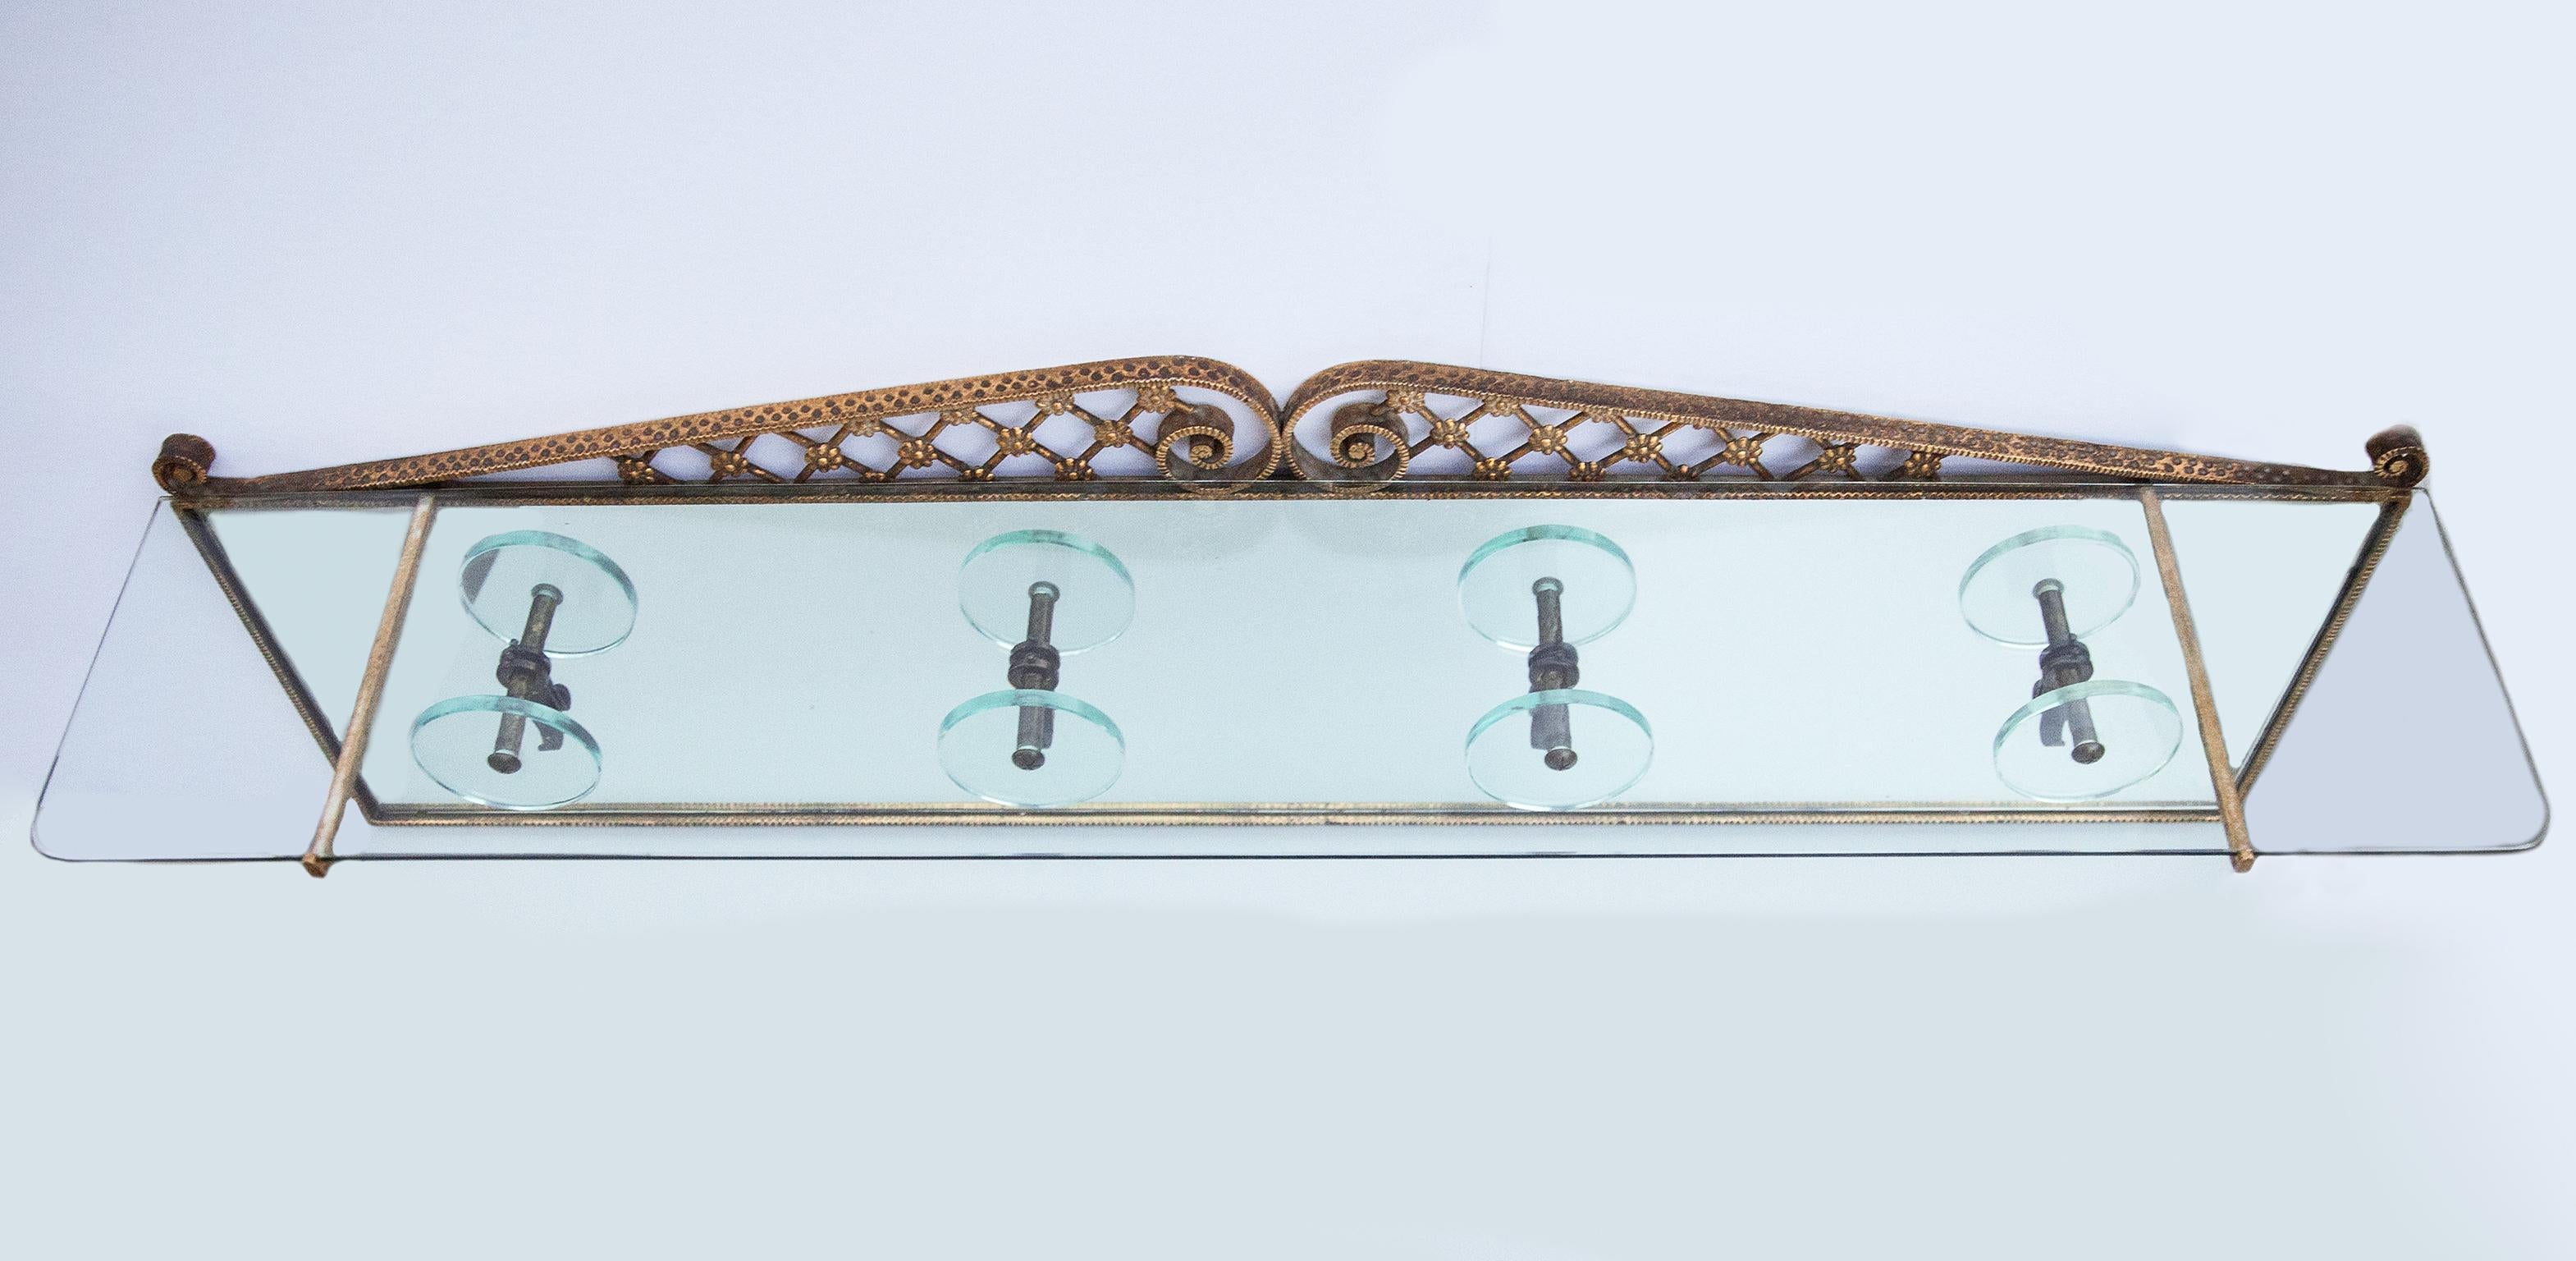 Pierluigi Colli for crystal Art coat rack with hat shelf , Italy circa 1950, tempered glass wall wardrobe with four knobs and transparent crystal top, brass coat hooks, gilt iron frame, very huge and elegant object. 

  